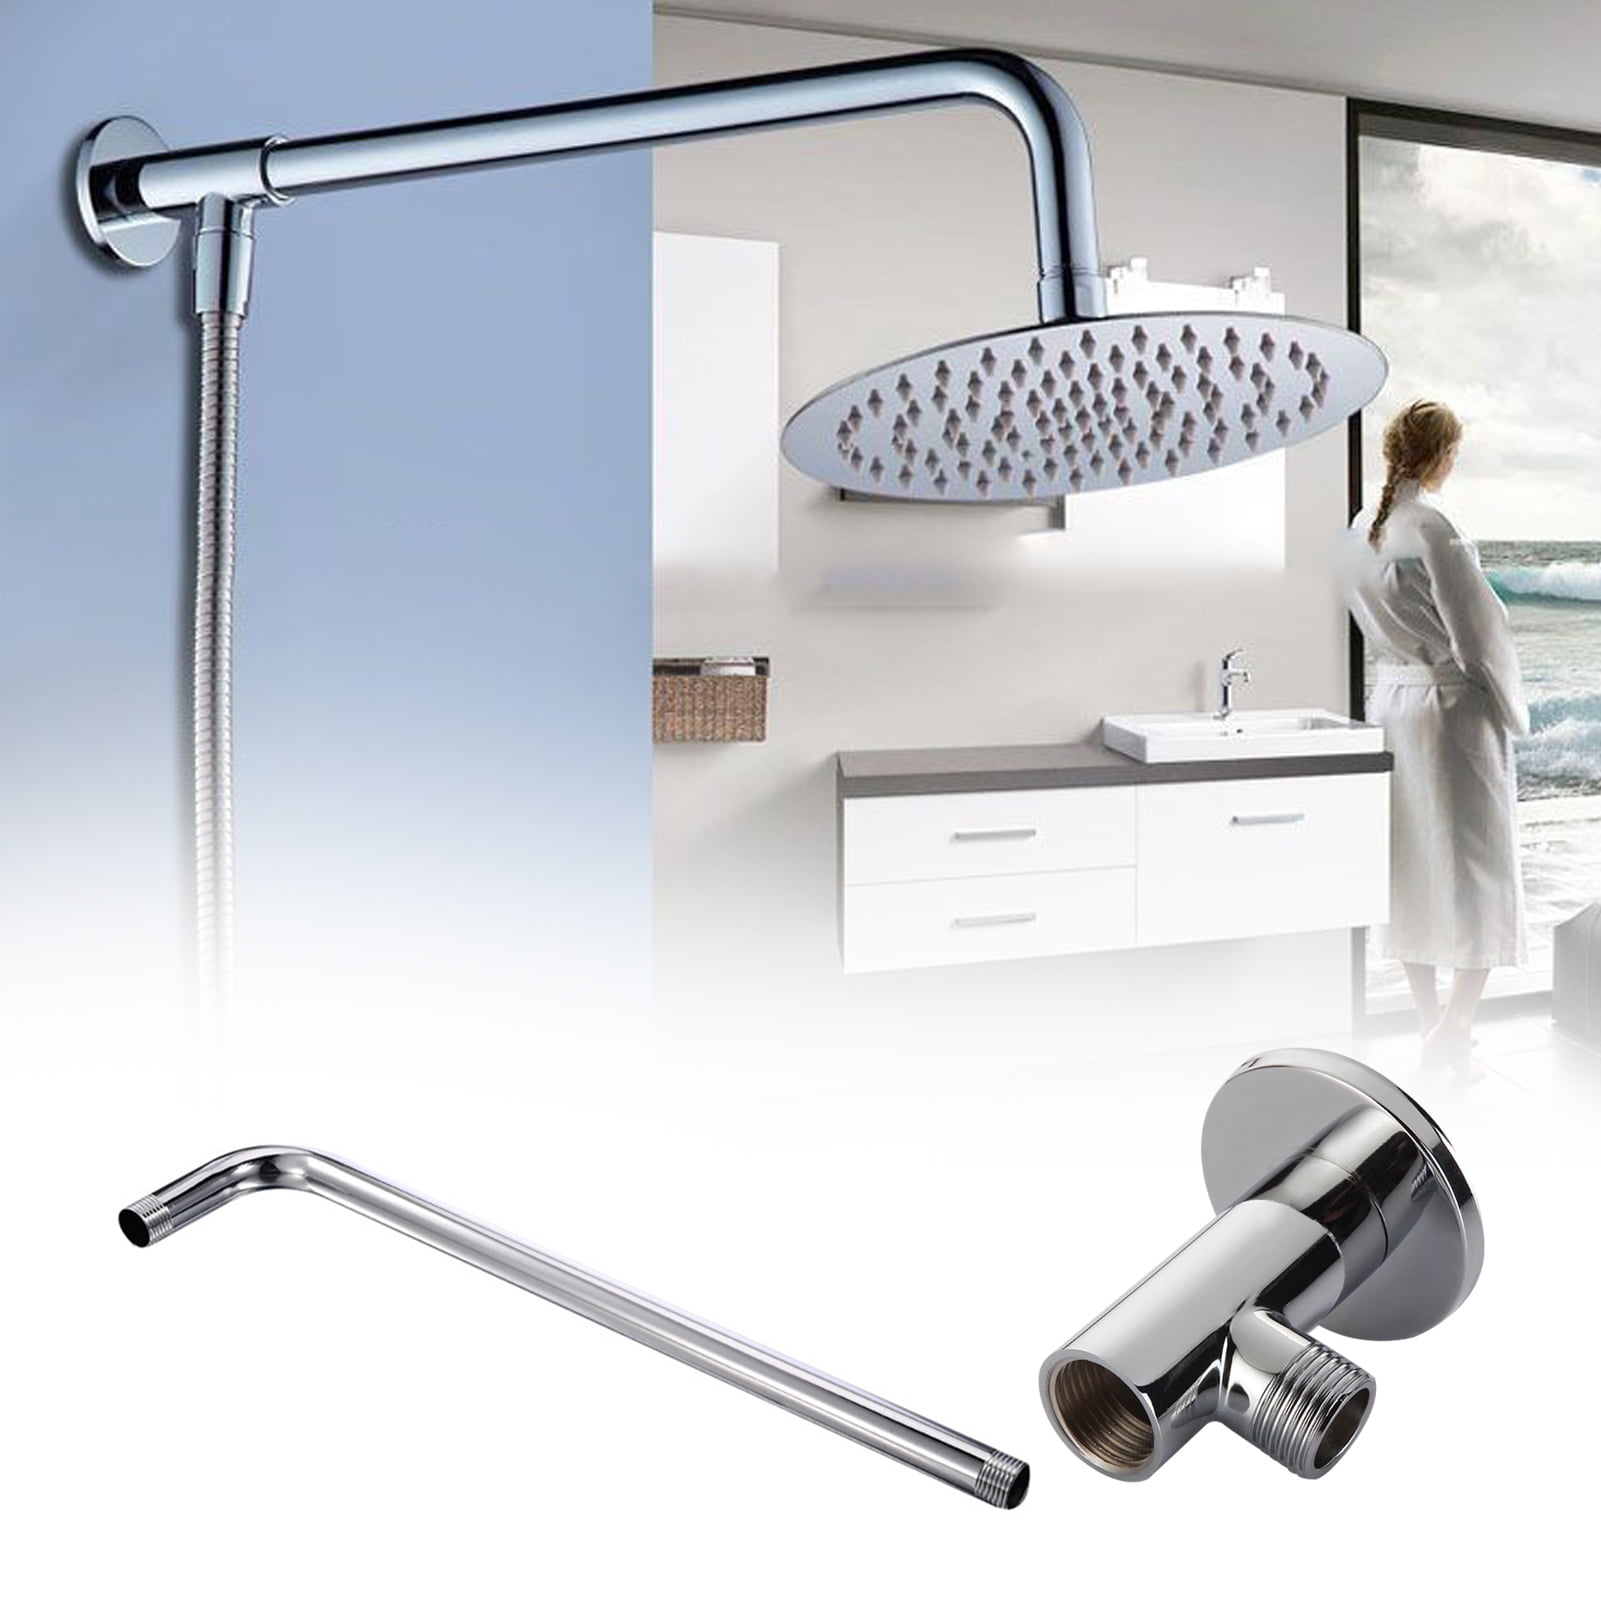 HYDa Stainless Mount Base Extension Pipe Arm Bathroom Accessories Walmart.com